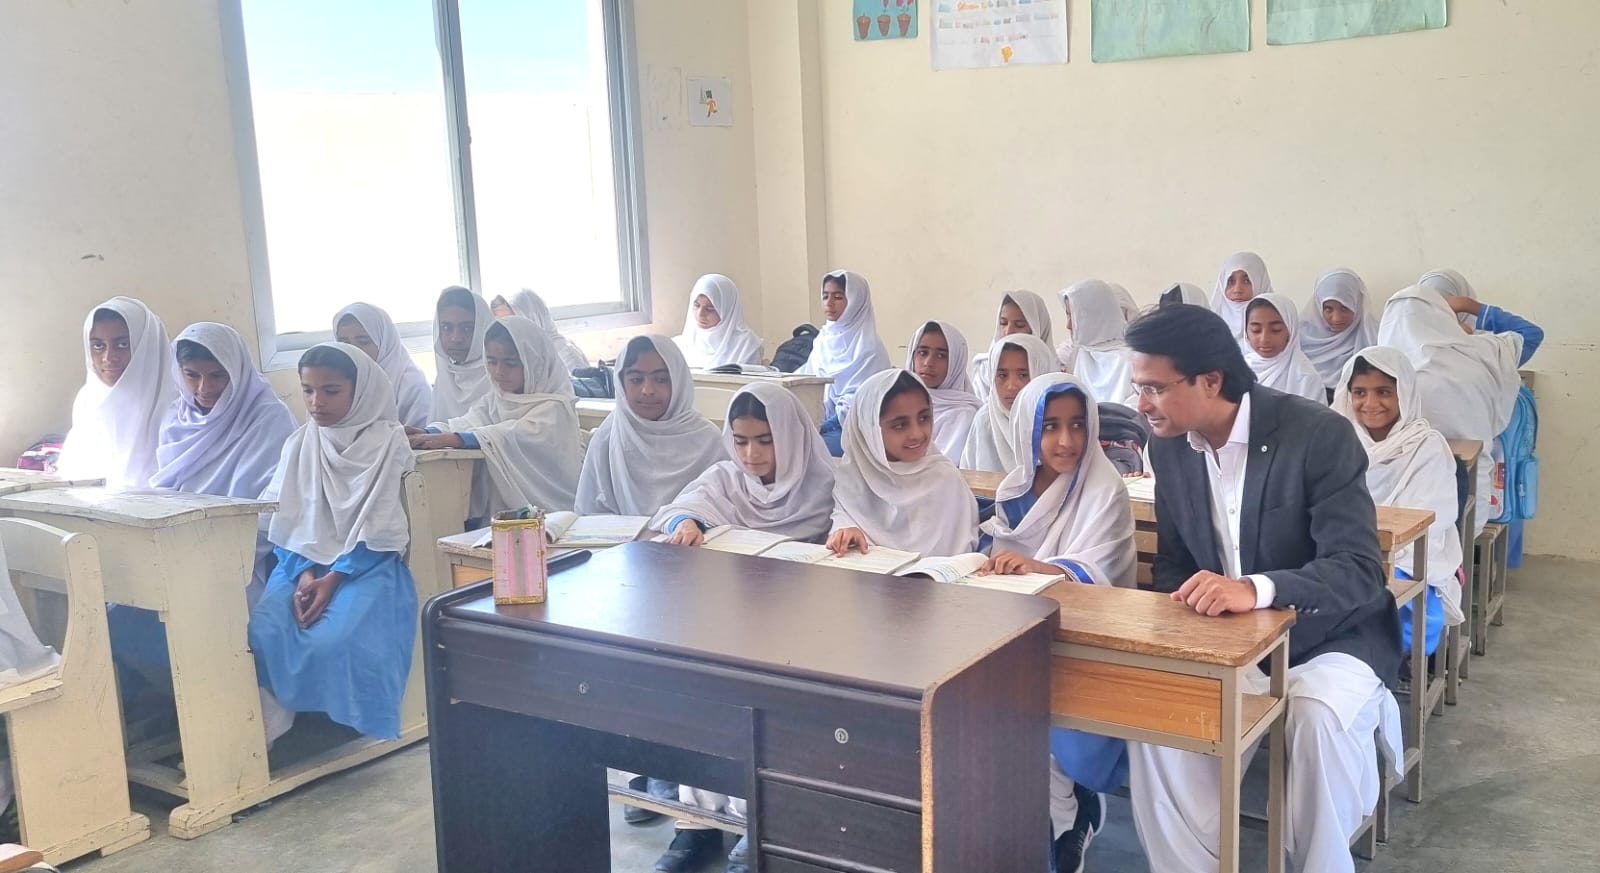 Rise of “Girls Education” for poor in Gwadar